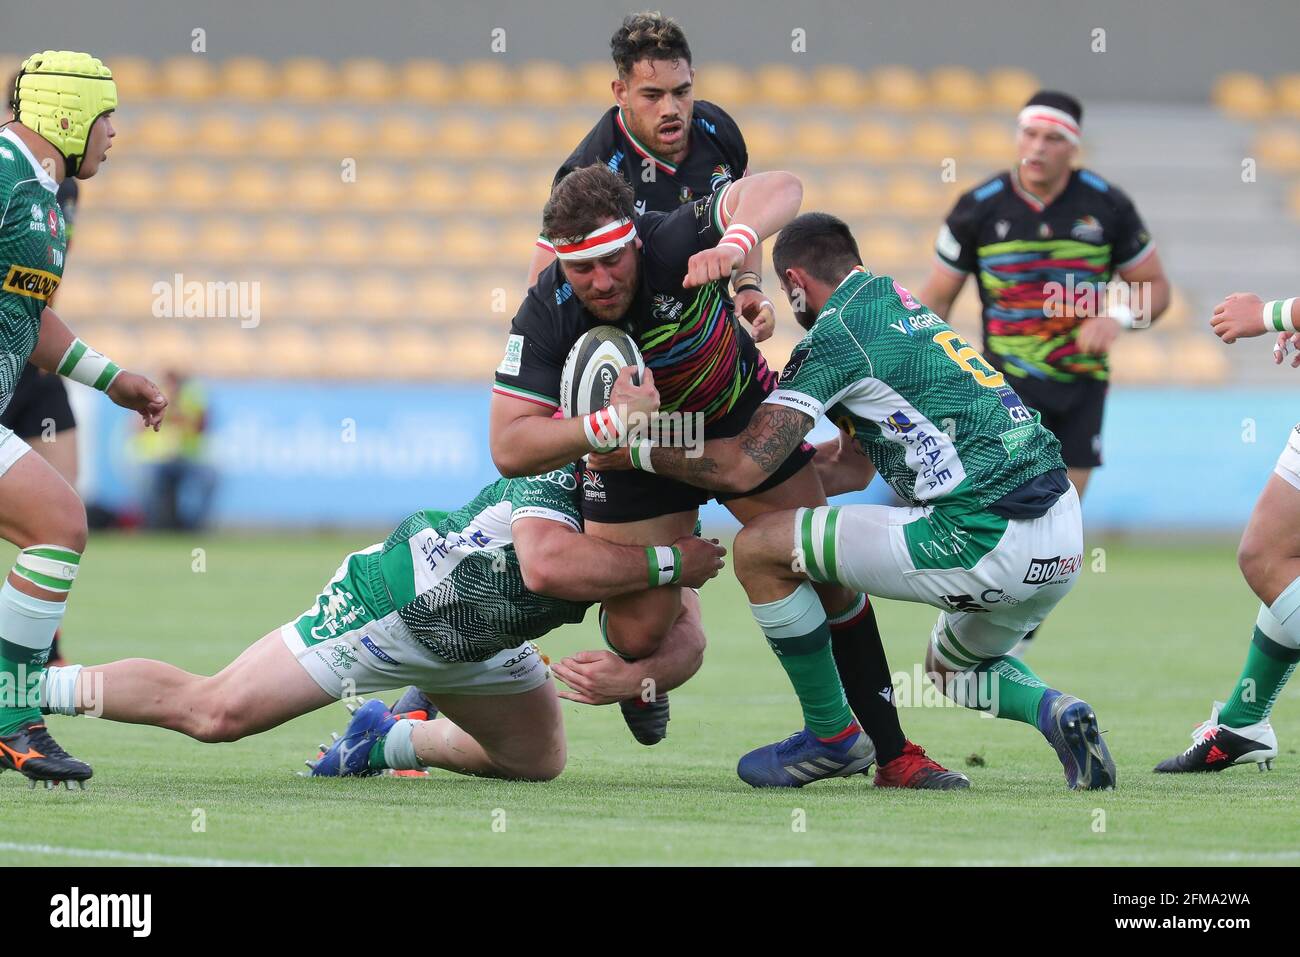 Parma, Italy. 07th May, 2021. Sergio Lanfranchi stadium, Parma, Italy, 07  May 2021, Eduardo Bello (Zebre rugby) is tackled by Riccardo Favretto and  Federico Ruzza (Benetton rugby) during Rainbow Cup - Benetton